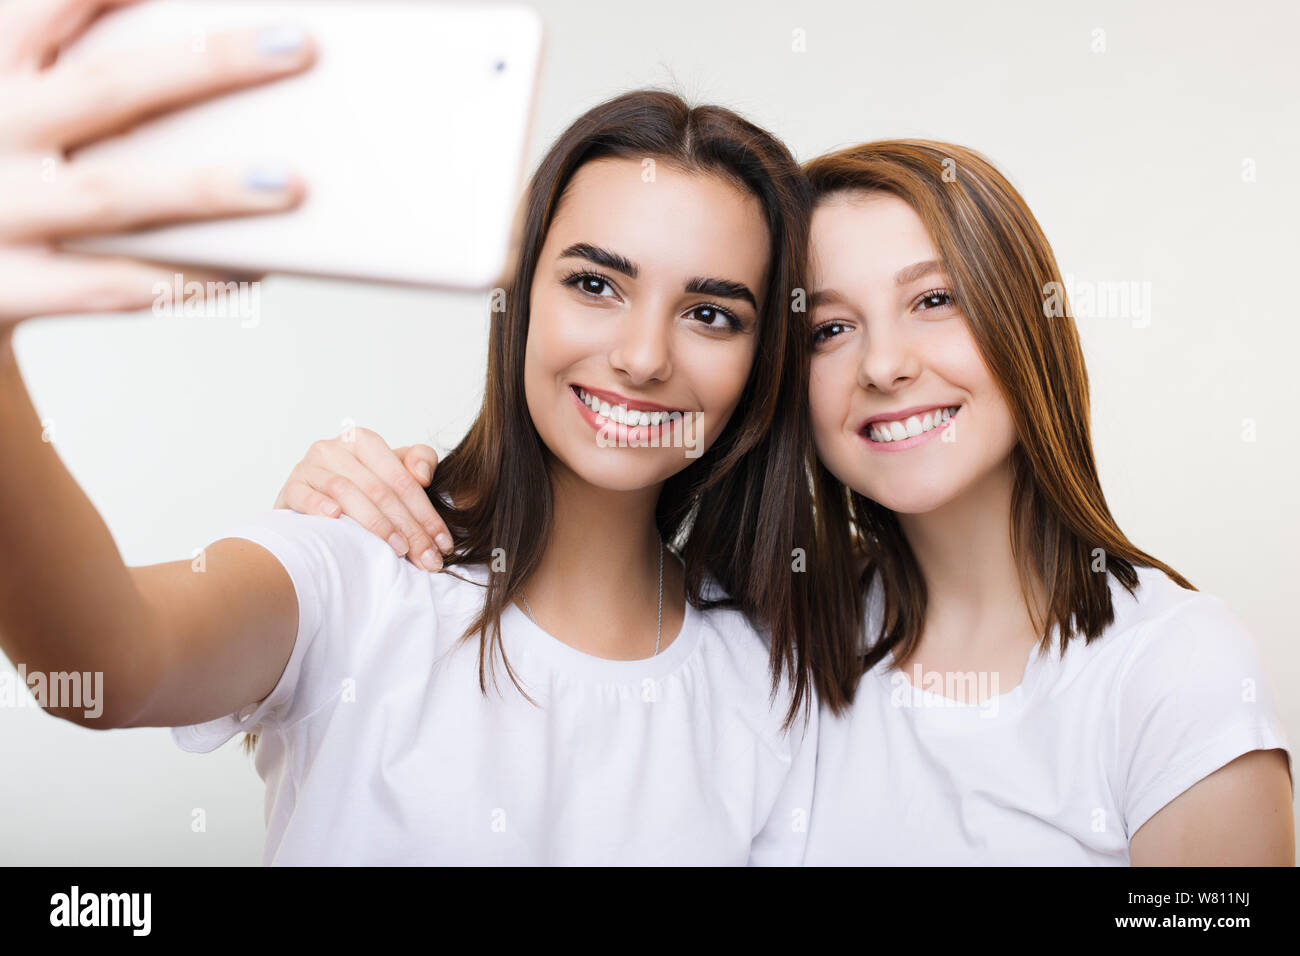 Two beautiful young woman dressed in white doing a selfie smiling and embracing isolated on a white studio background. Stock Photo